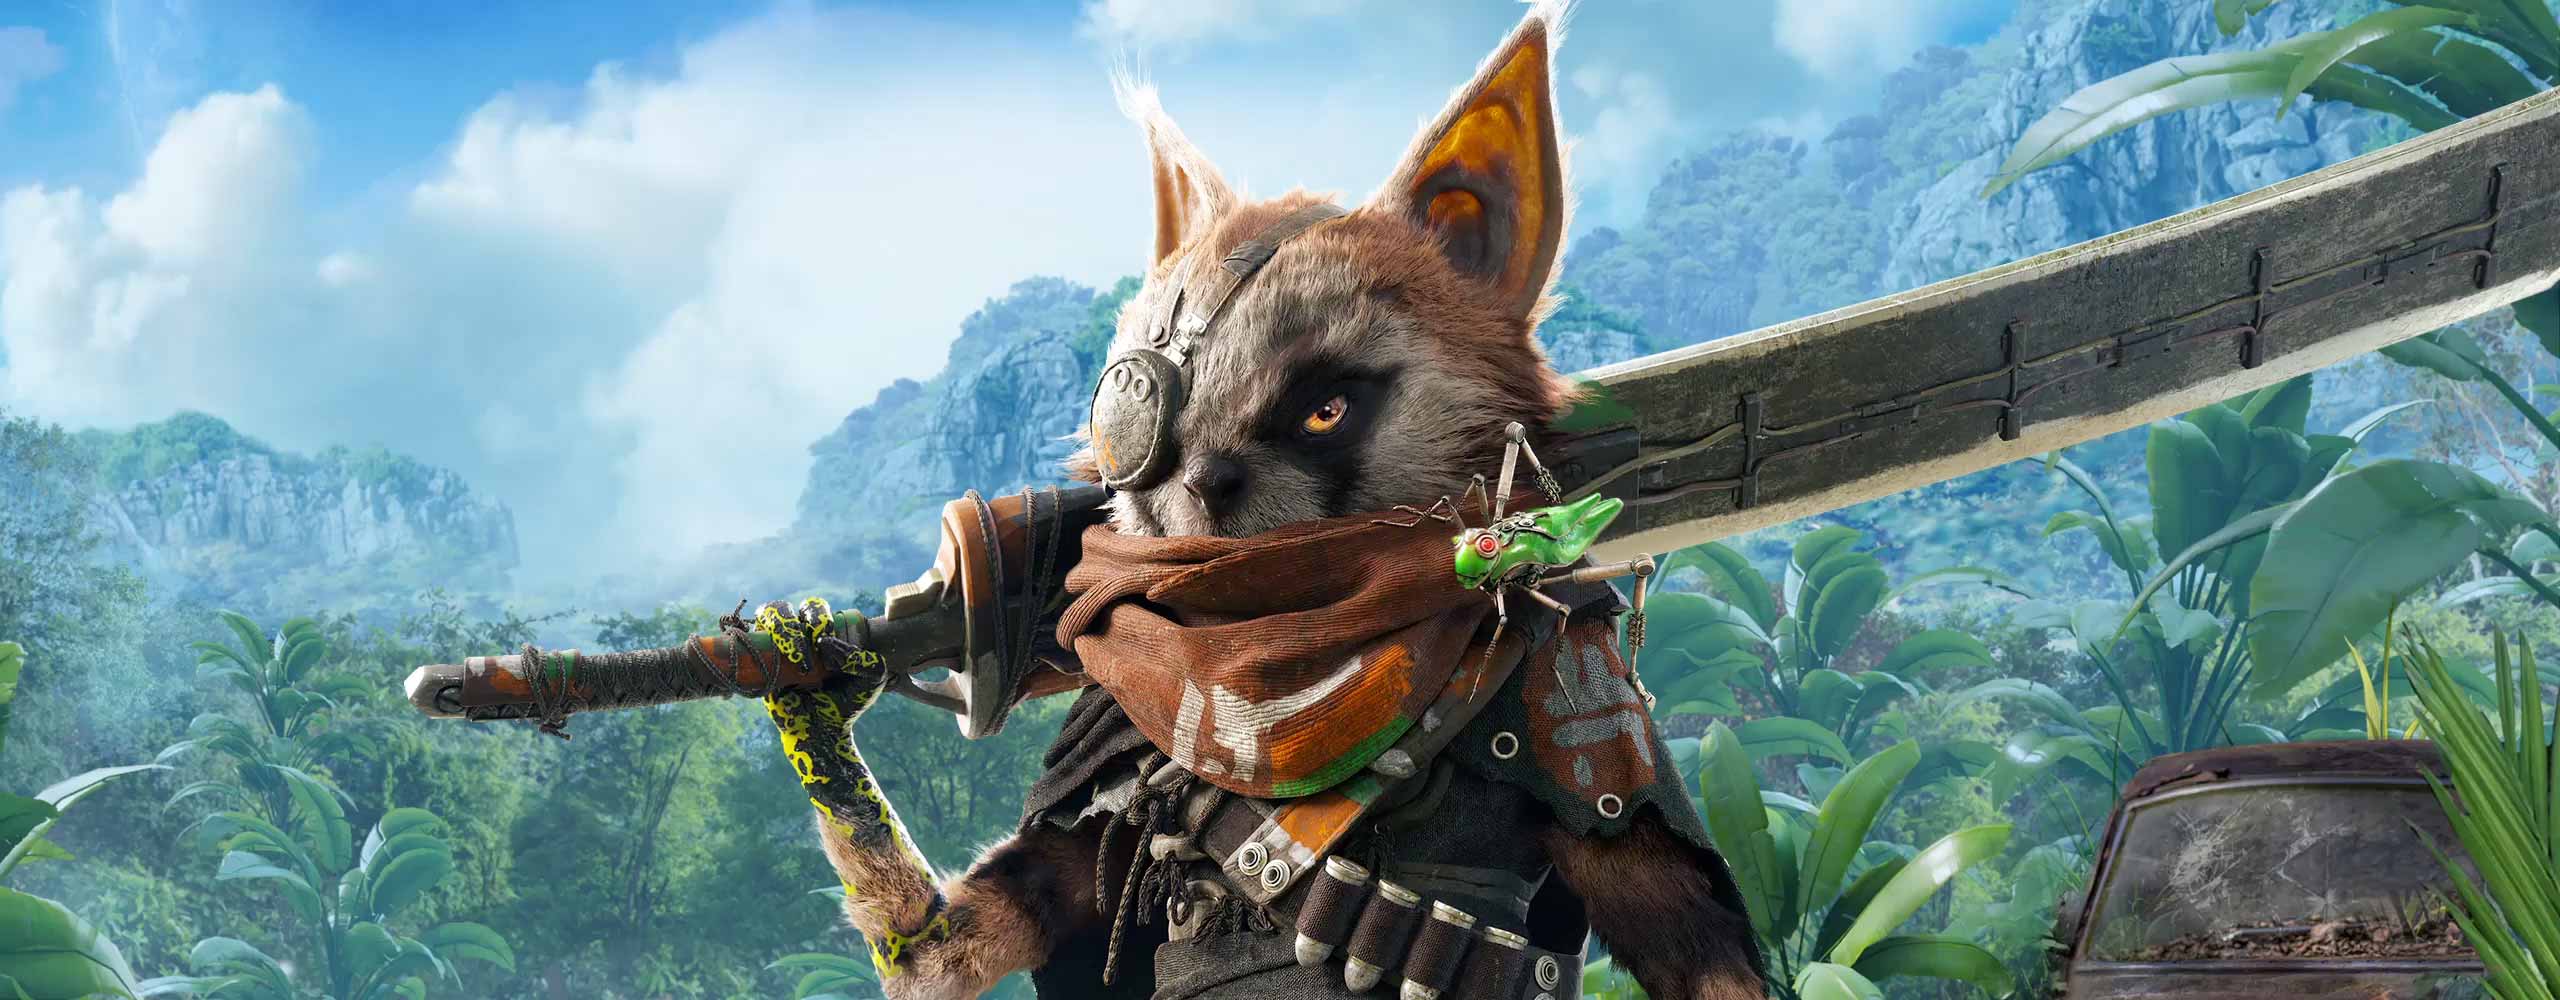 Image for Biomutant returns with new gameplay, but no release date